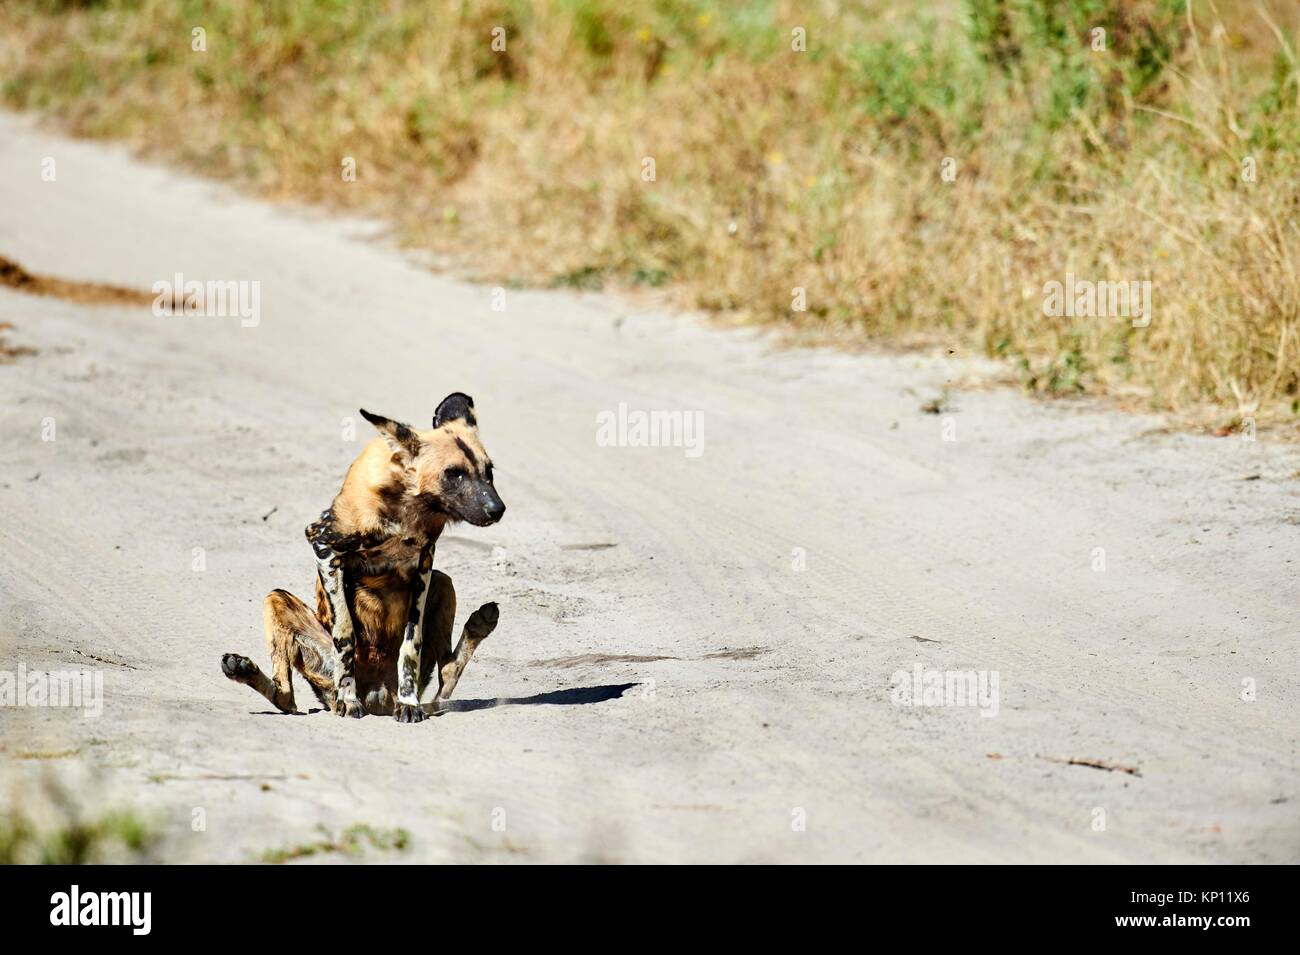 African wild dog (Lycaon pictus) scooting / rubbing its rear end. Moremi National Park, Okavango delta, Botswana, Southern Africa. Stock Photo